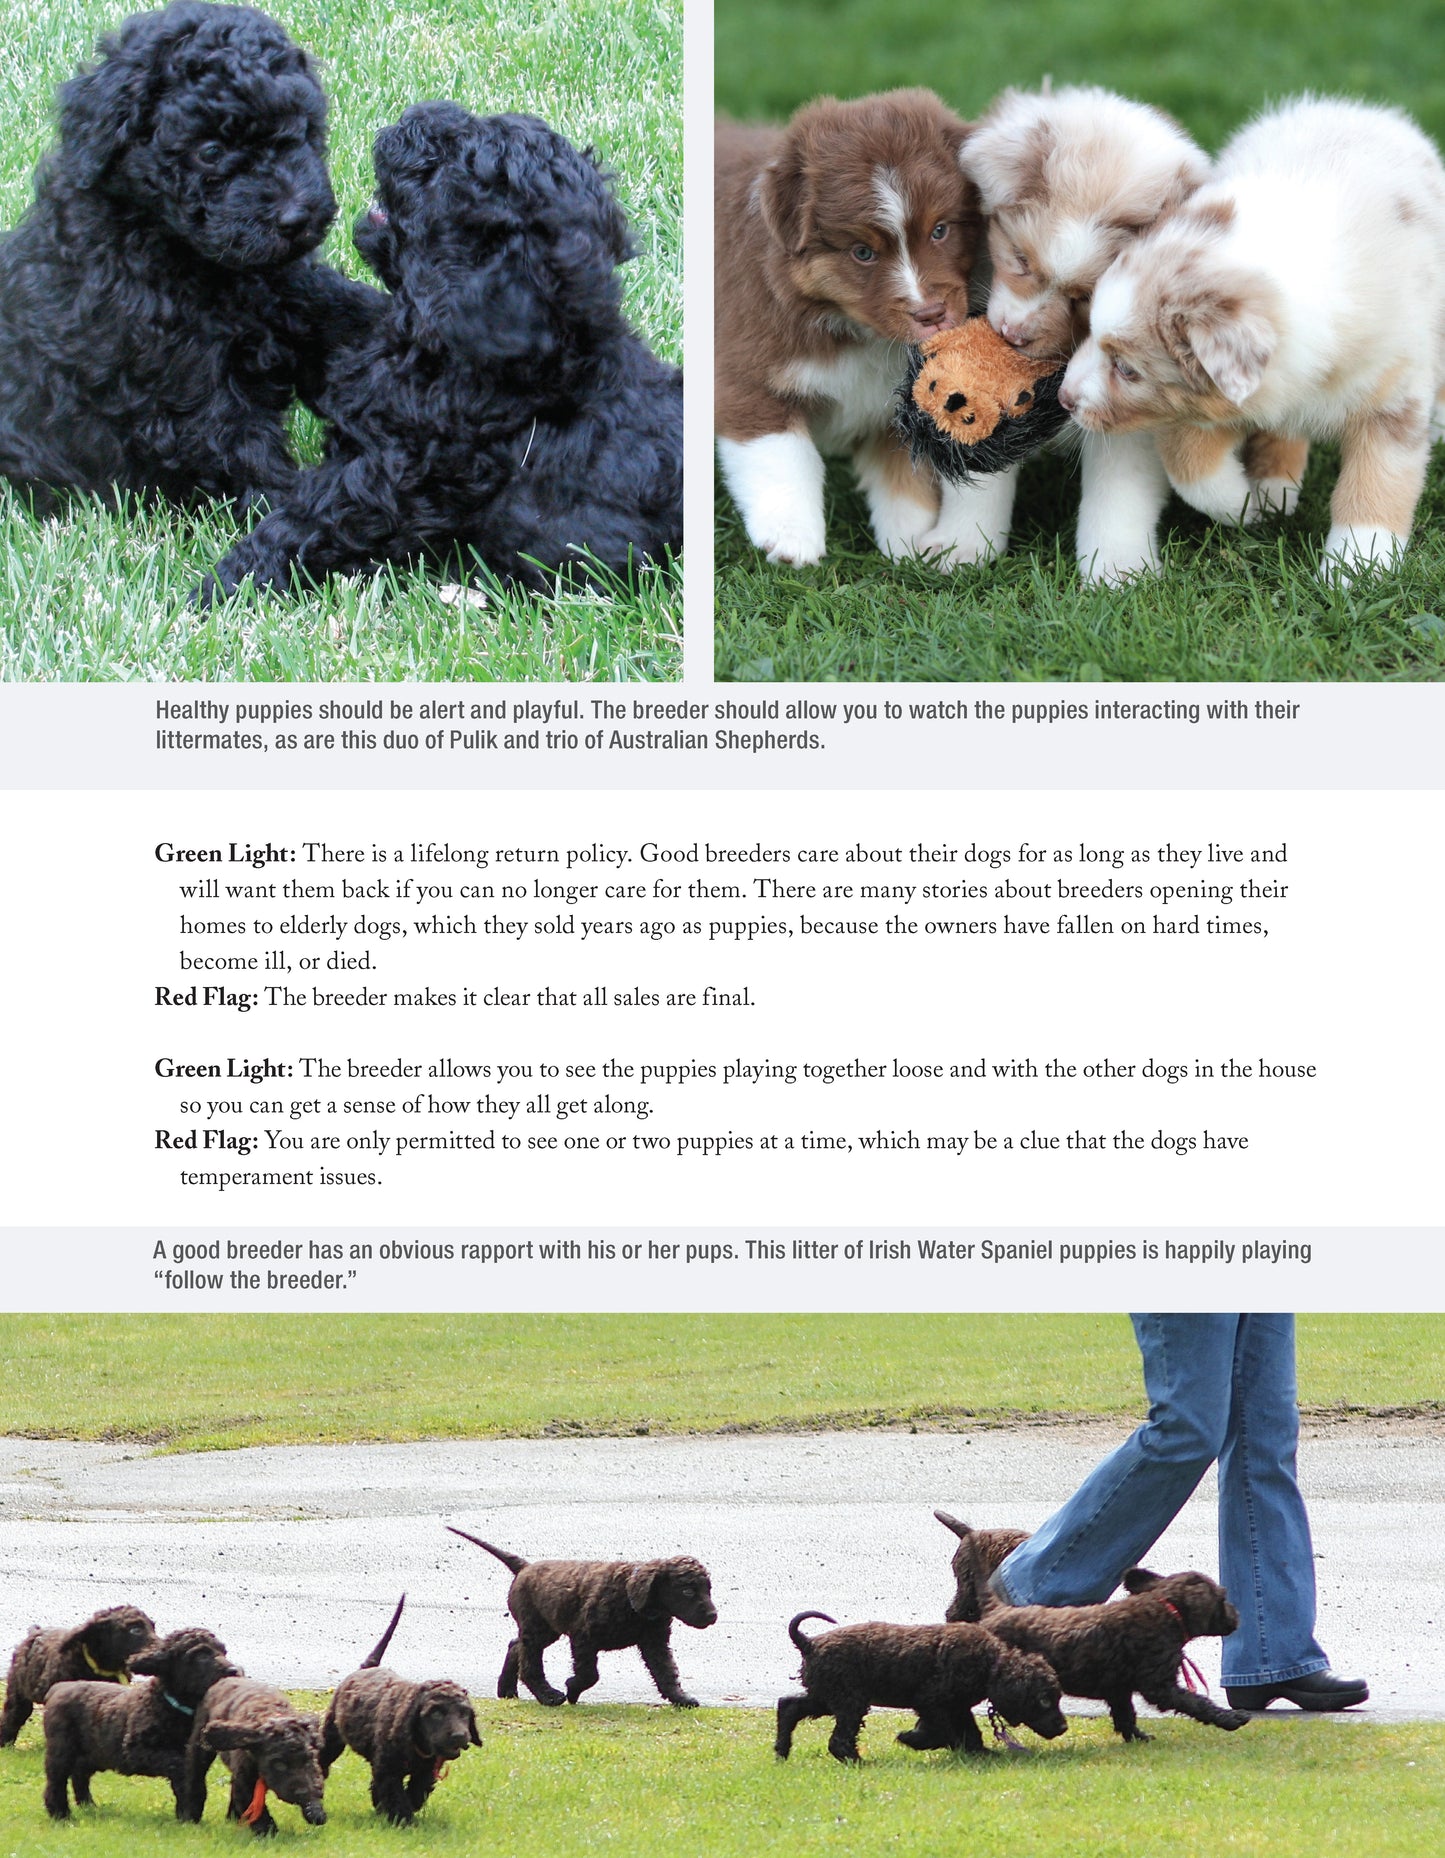 The New Complete Dog Book